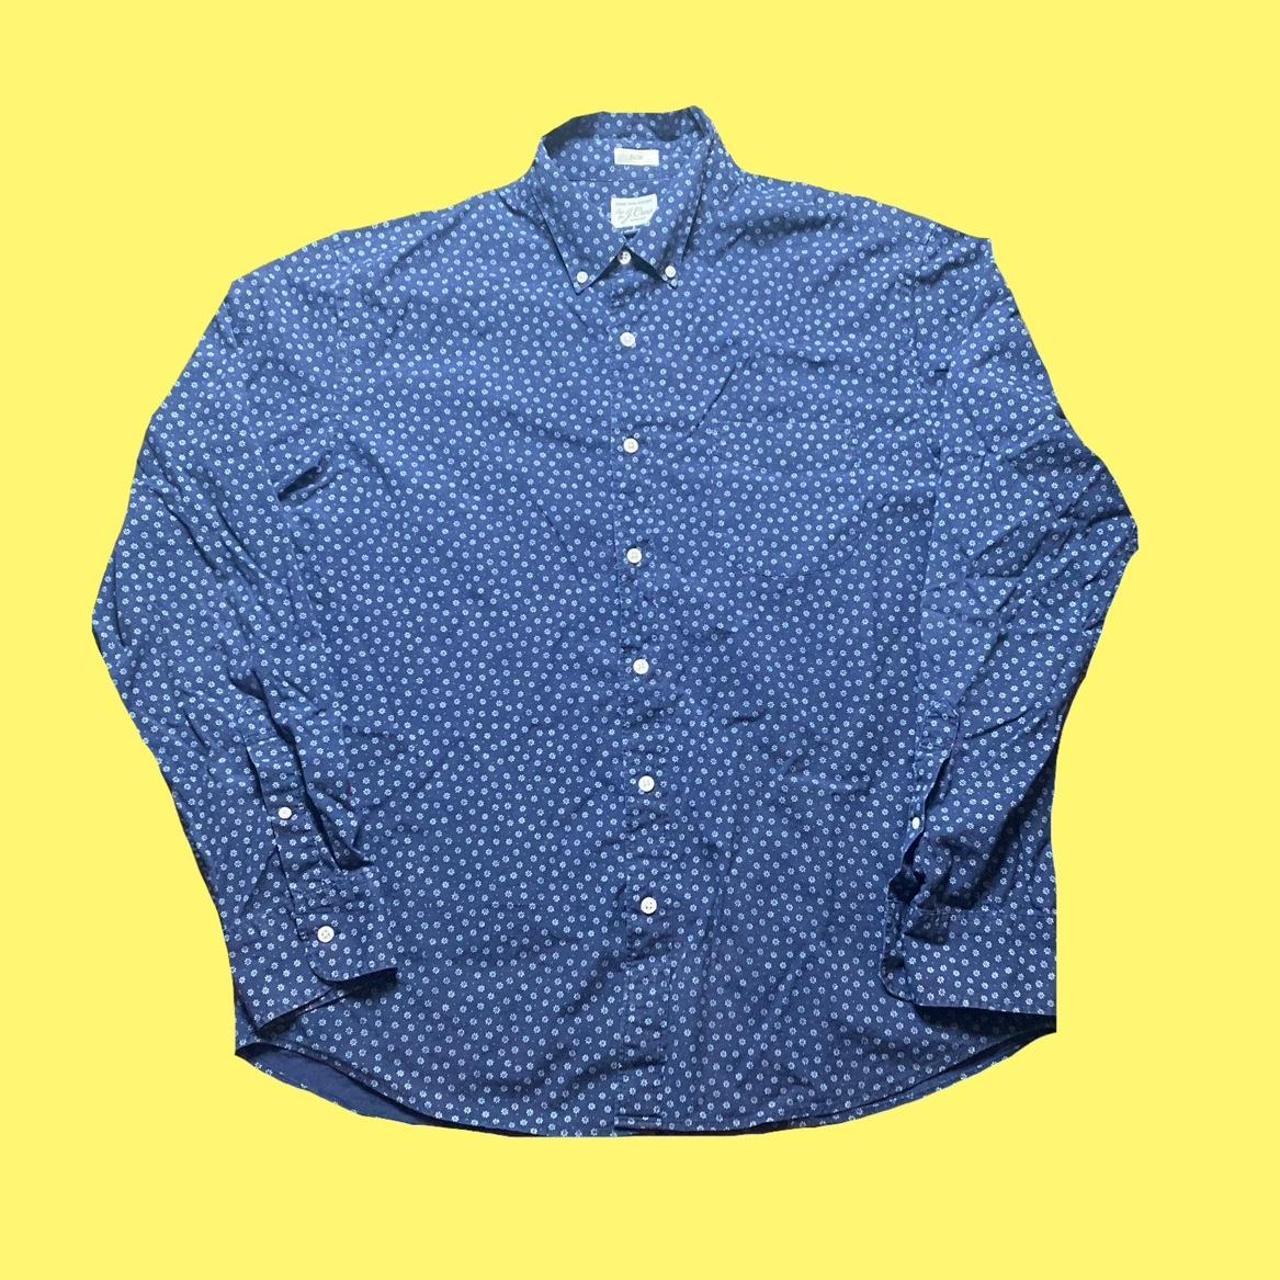  Men's All-Over Print Casual Shirt, Button Down Blue